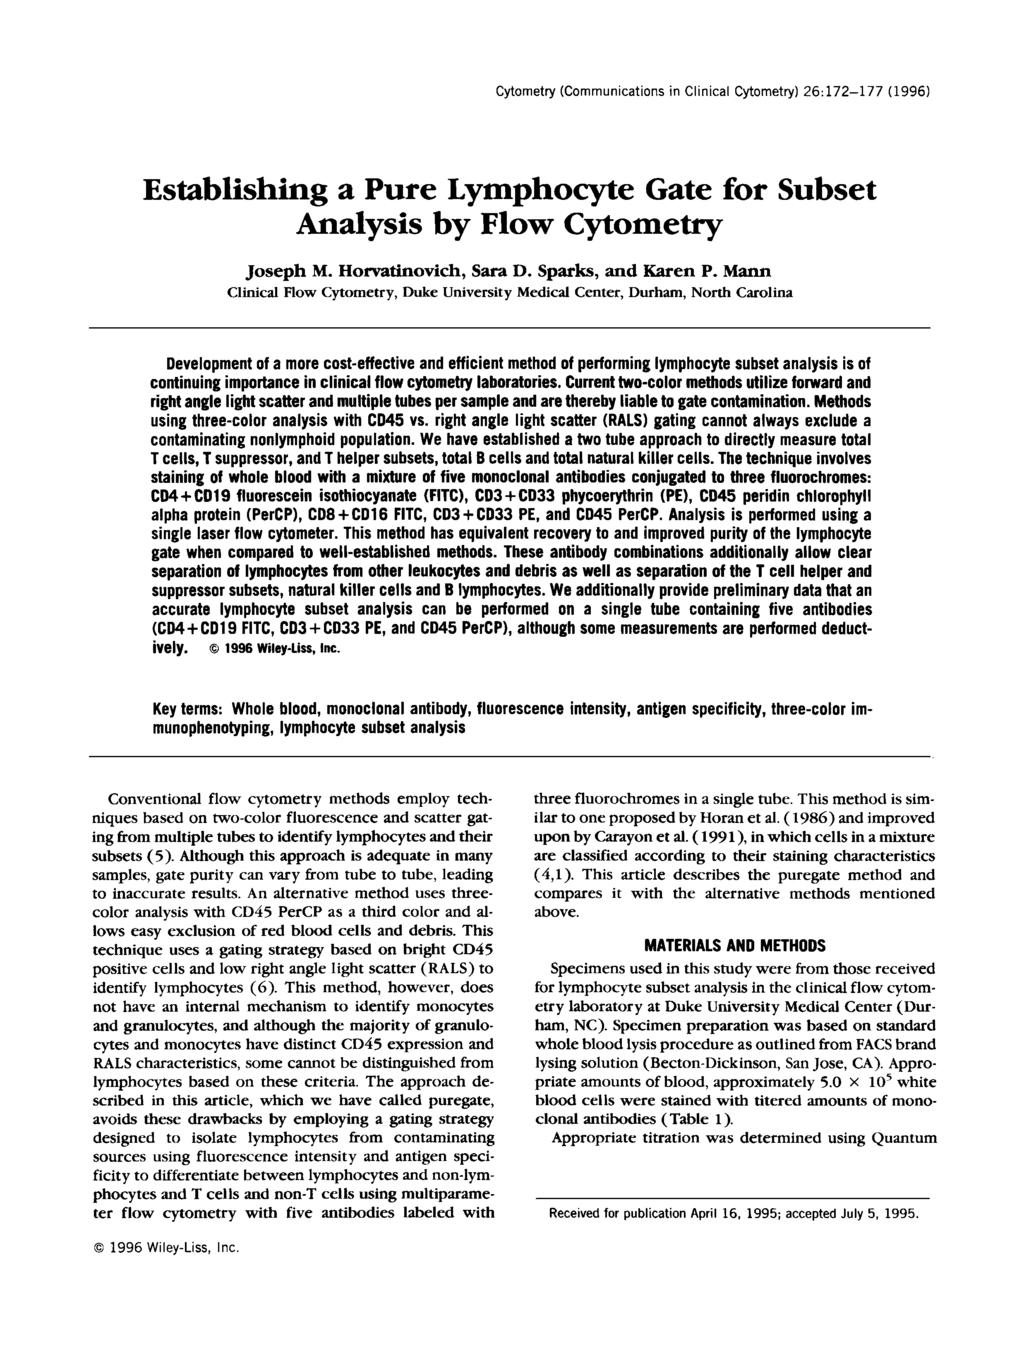 Cytornetry (Communications in Clinical Cytometry) 26:172-177 (1996) Establishing a Pure Lymphocyte Gate for Subset nalysis by Flow Cytometry Joseph M. Homtinovich, Sara D. Sparks, and Karen P.